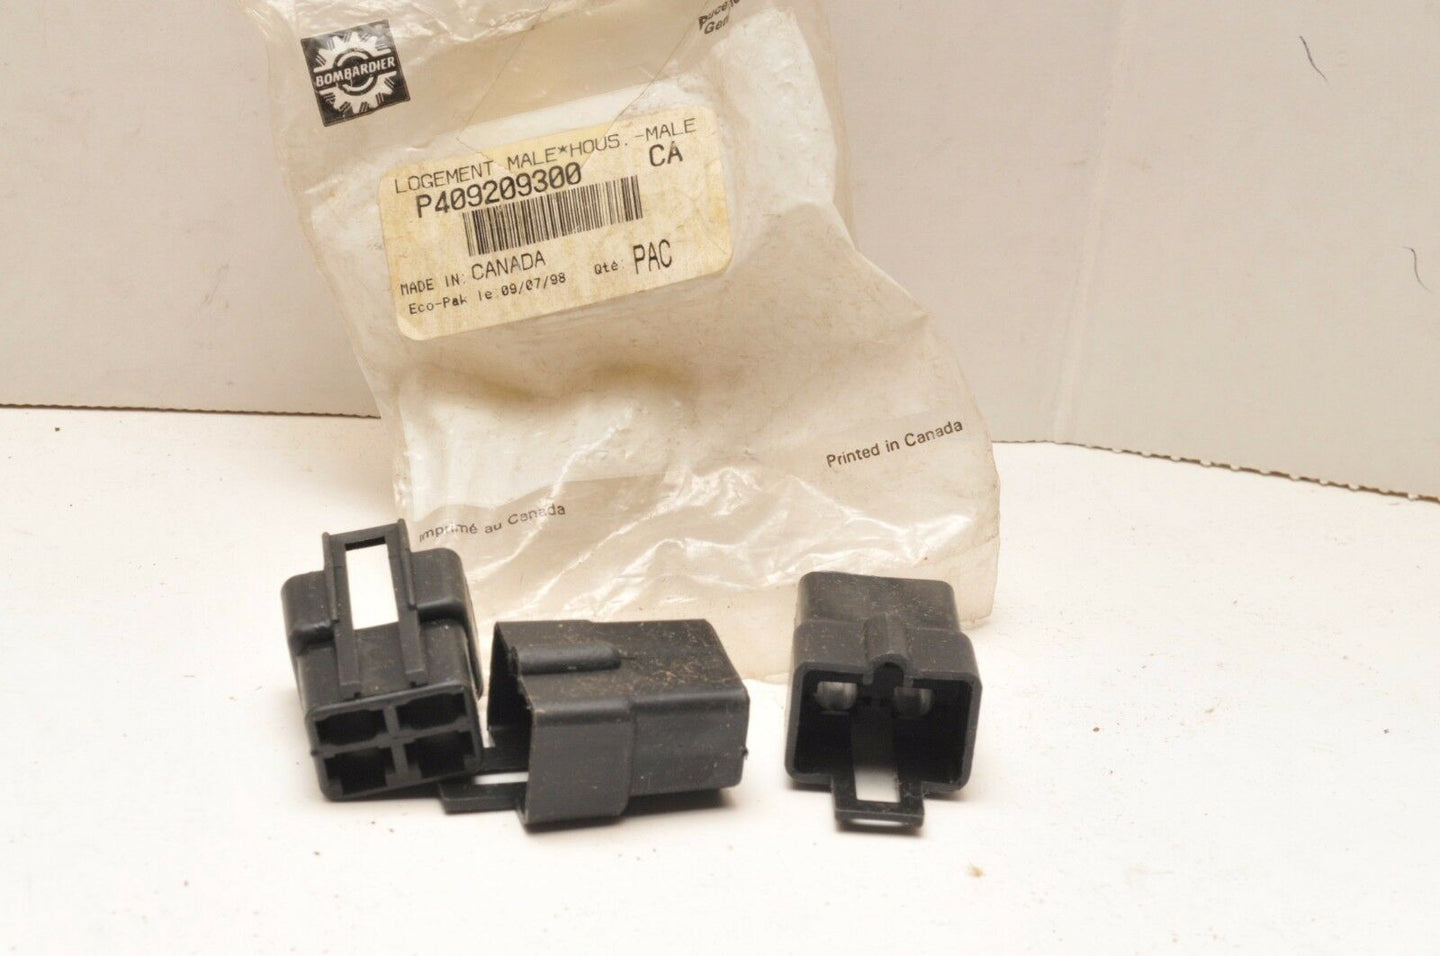 New NOS SkiDoo BRP MALE CONNECTOR HOUSING 409209300 LOT OF 3